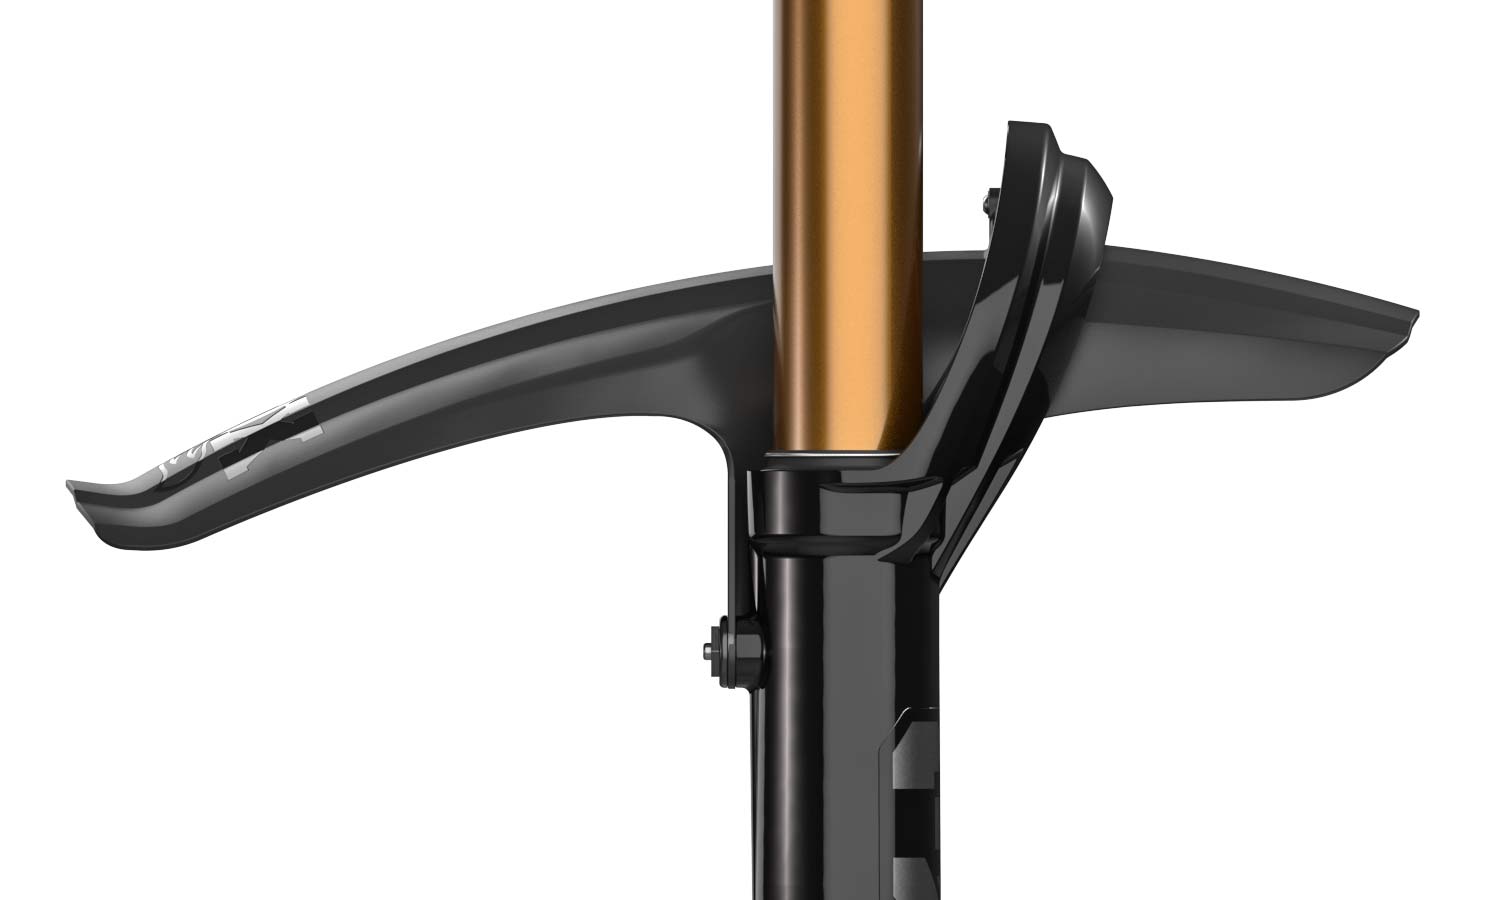 FOX XL Mudguard extends protection for 36 38 MTB forks, side profile